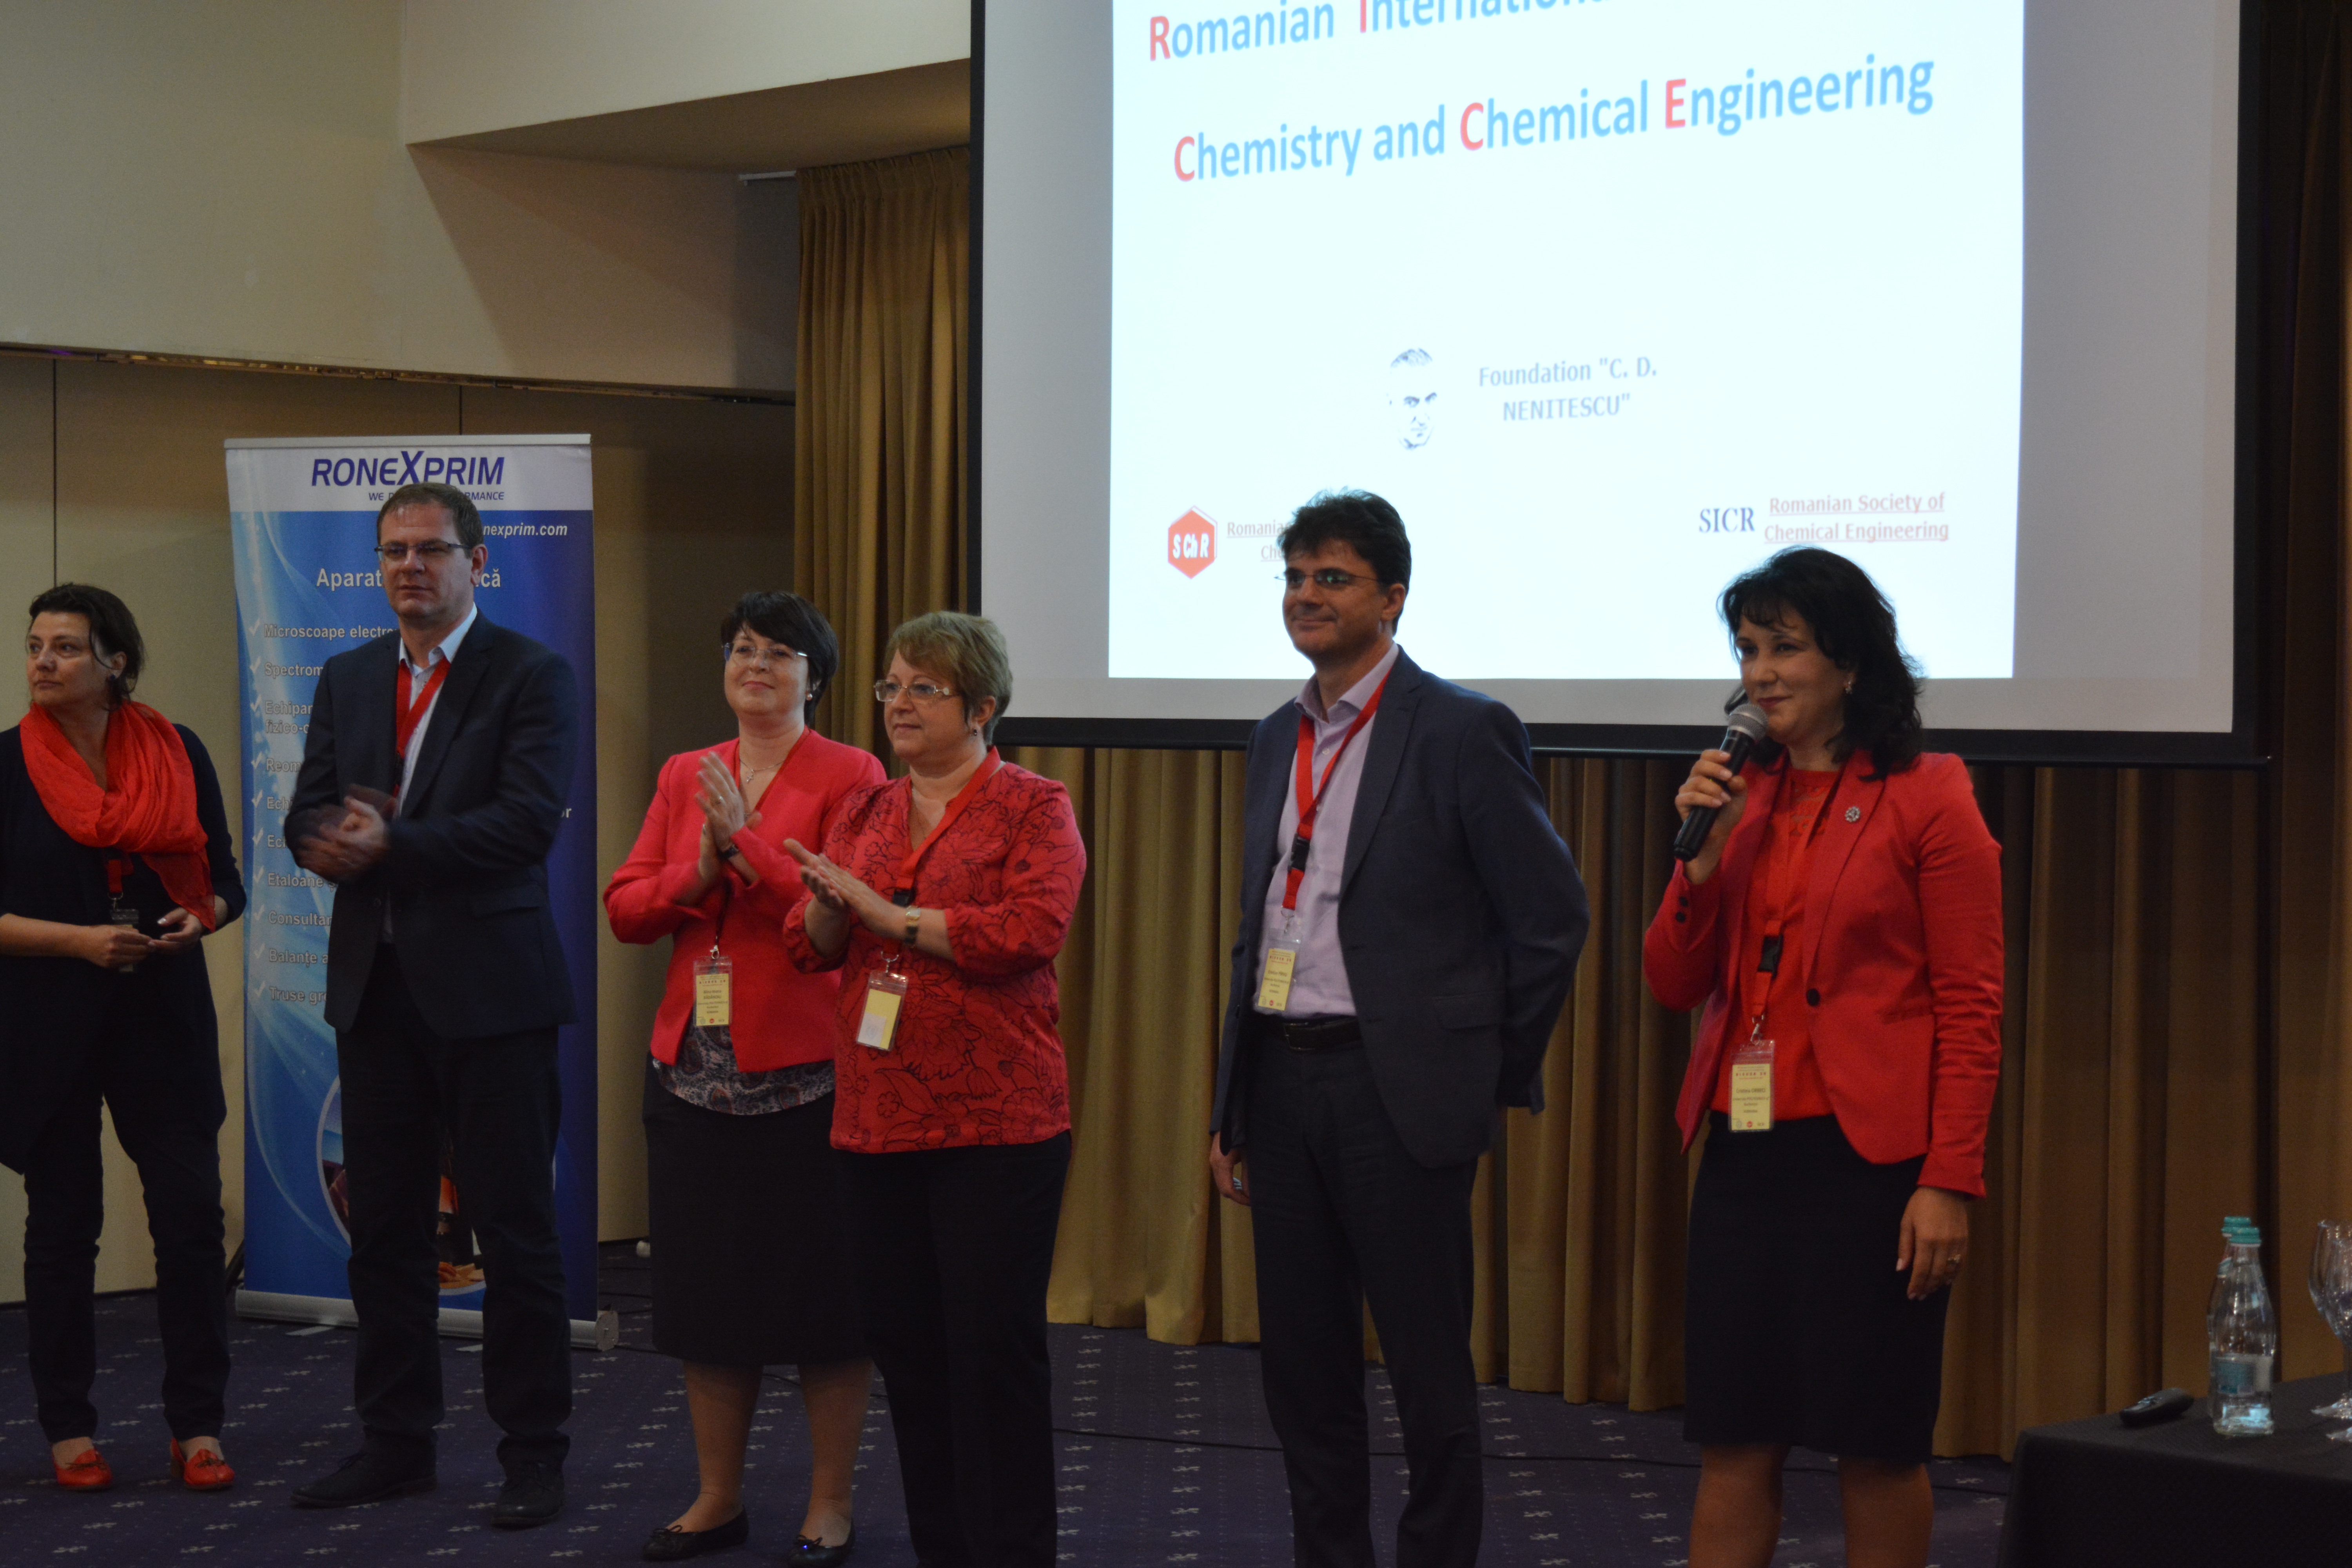 The 20th Romanian International Conference on Chemistry and Chemical Engineering (RICCCE)